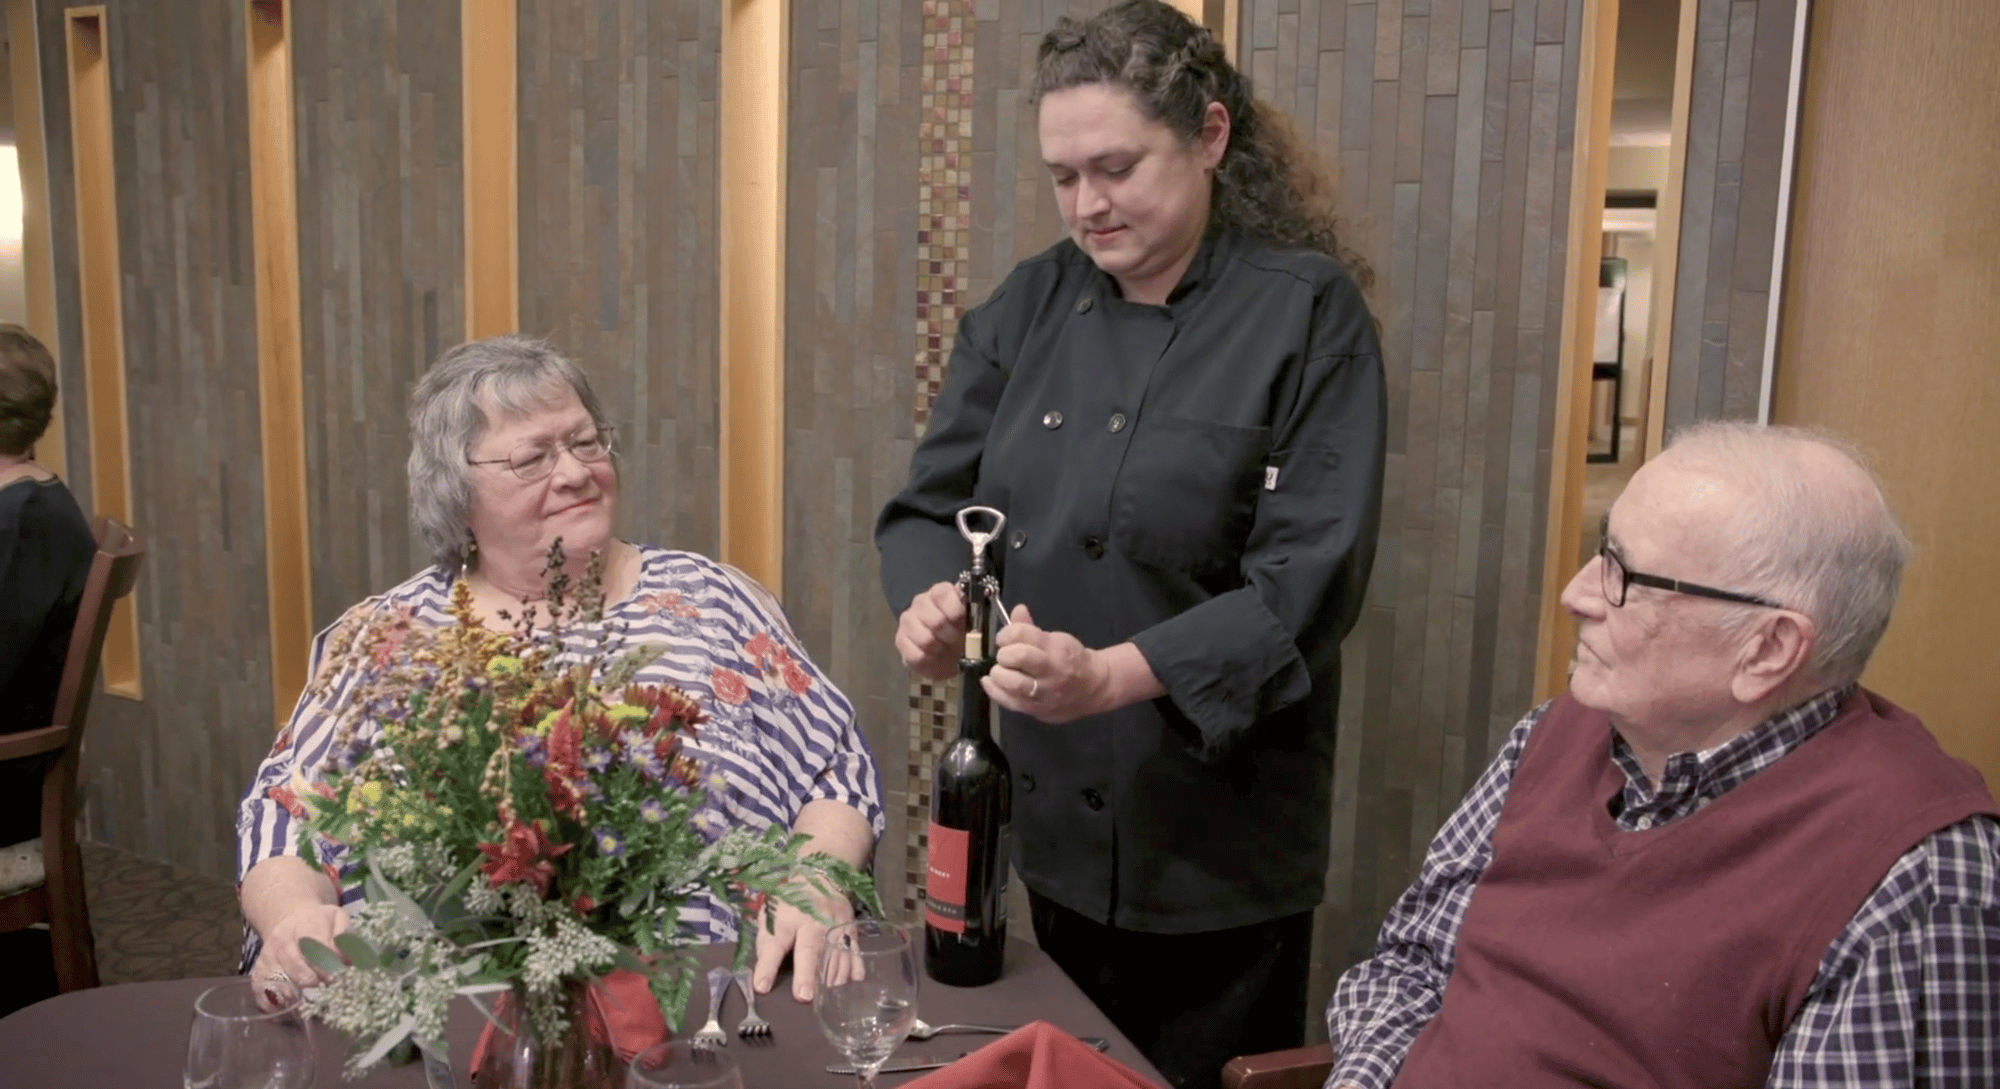 Waitress opening a bottle of wine for two older adults